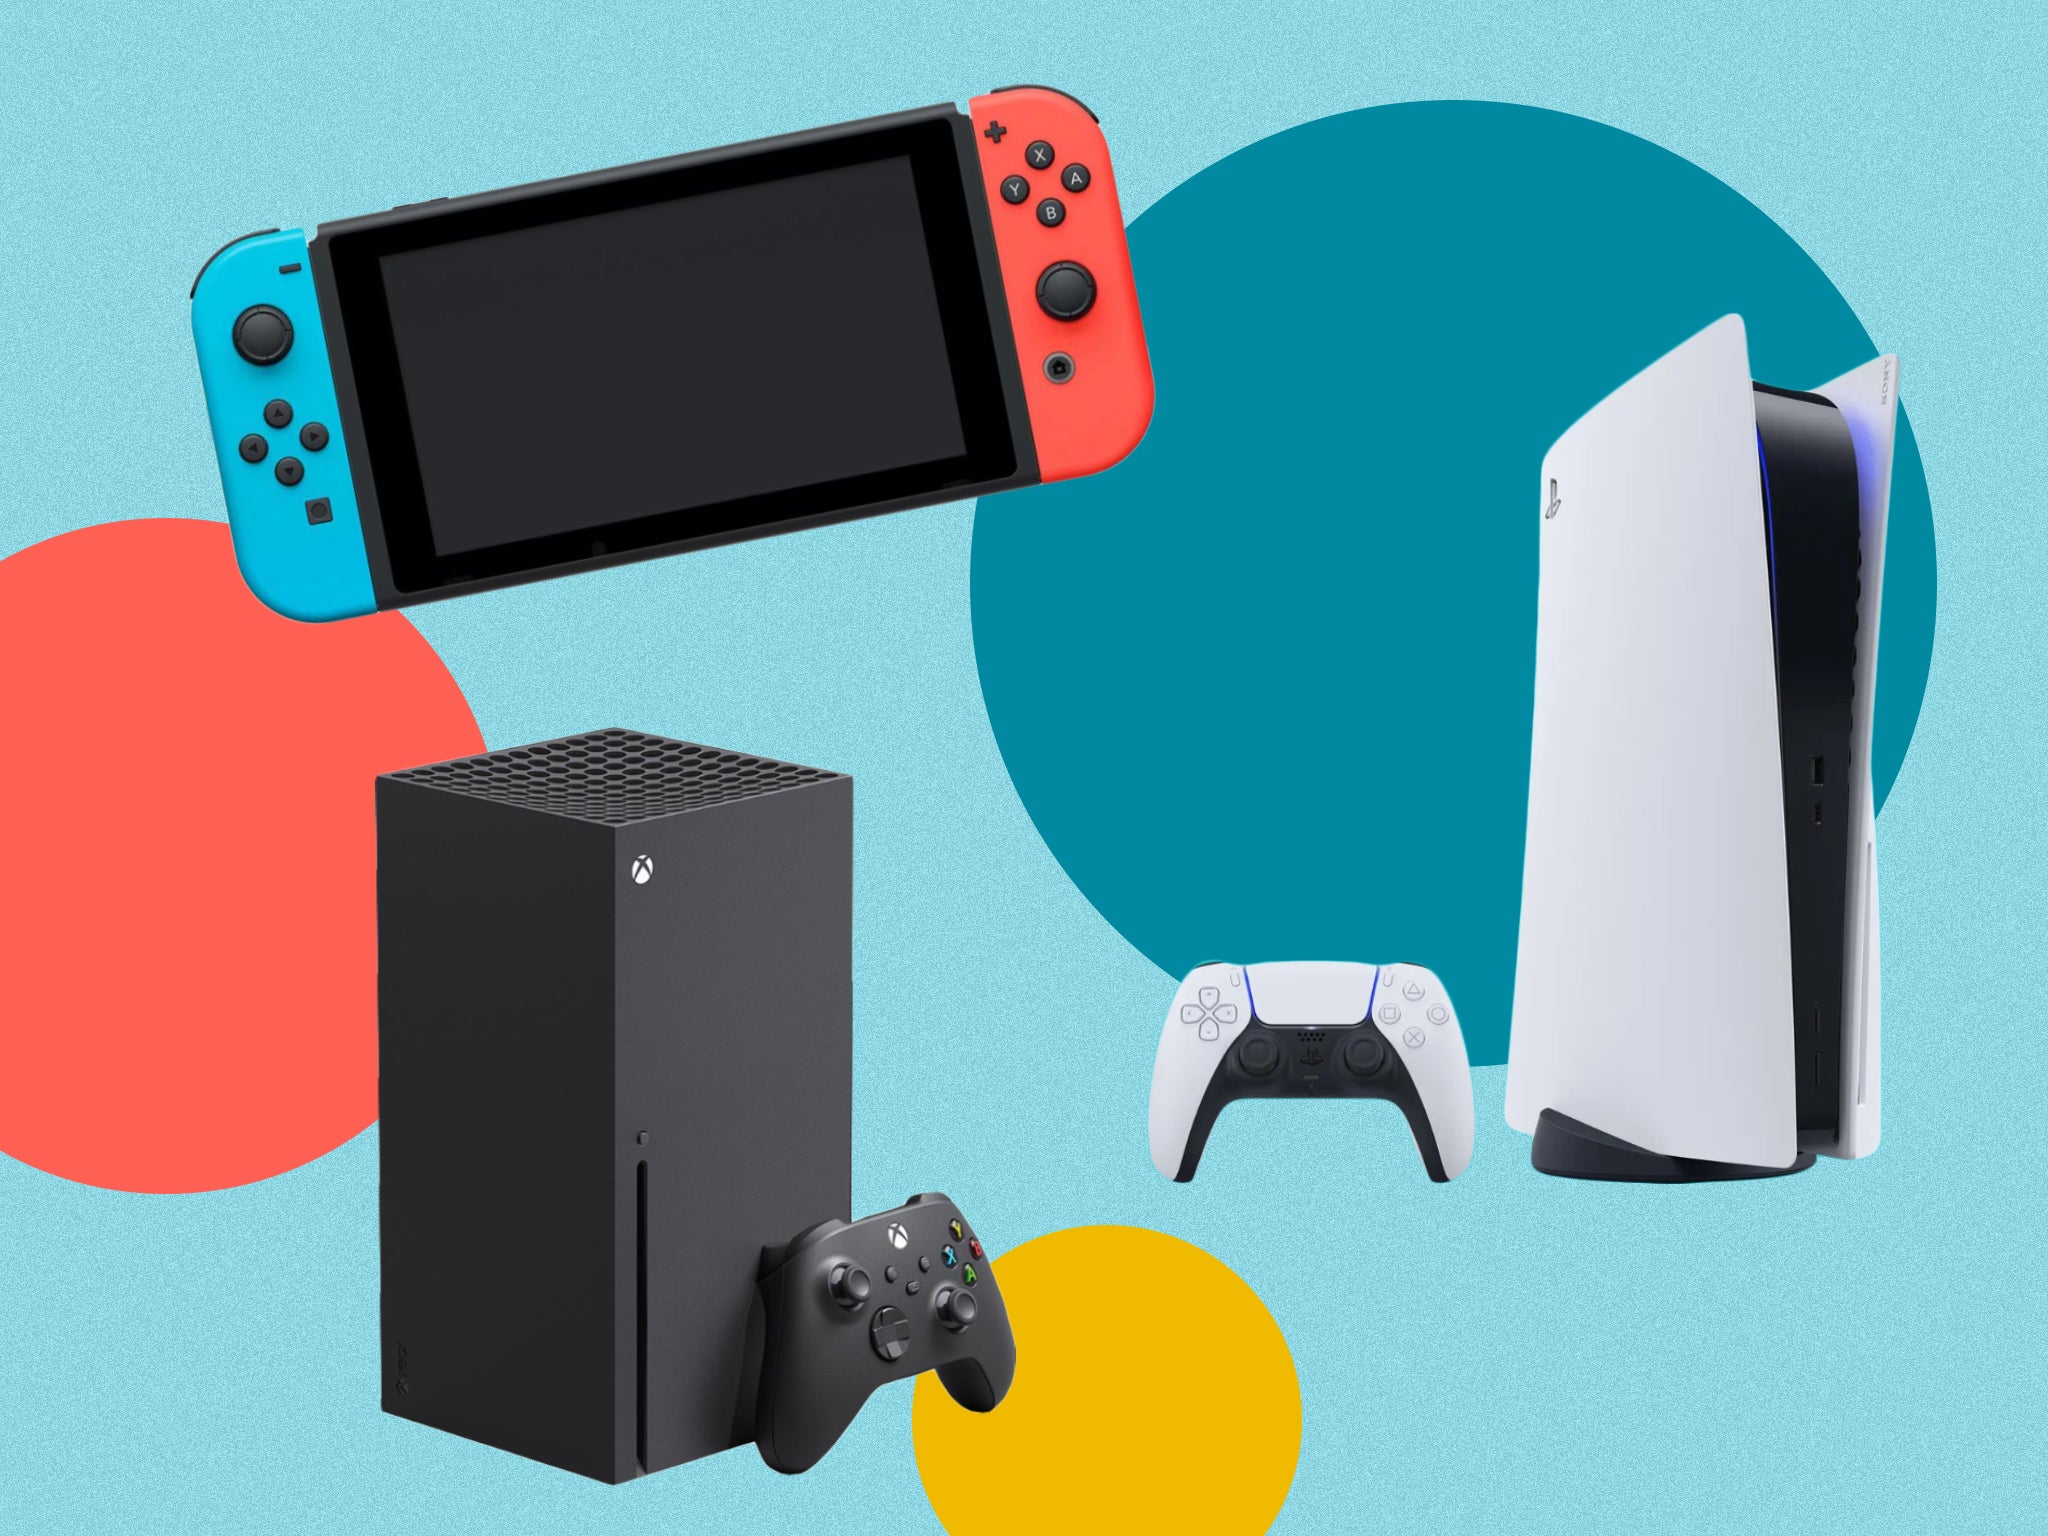 We find out which console is the most energy efficient